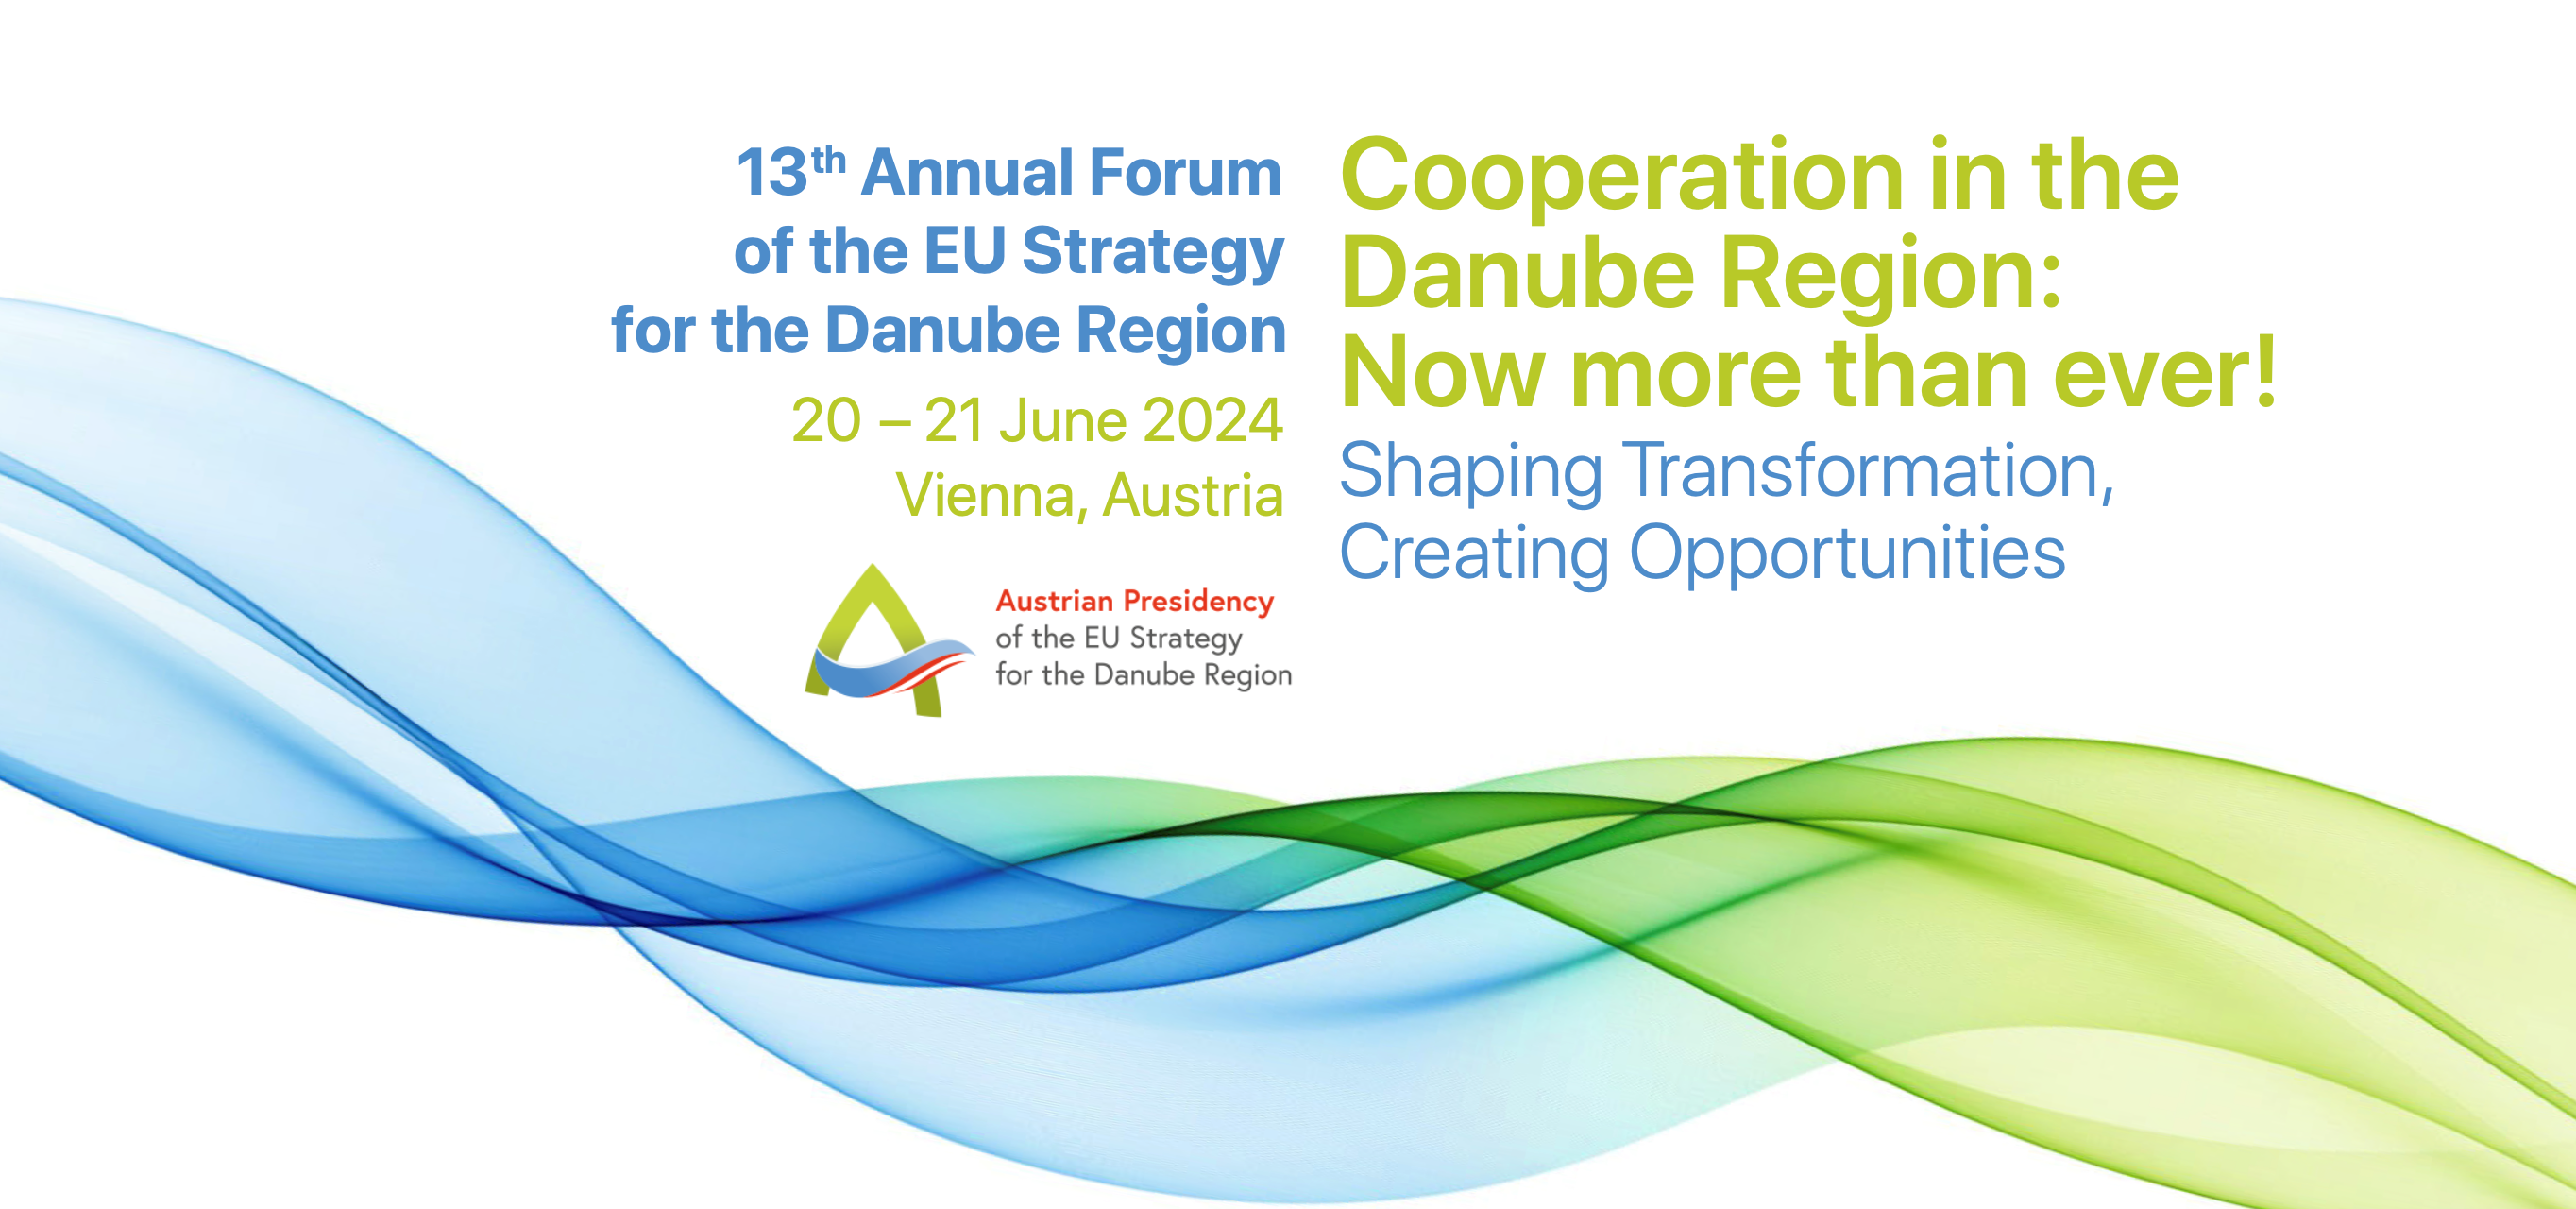 Join the Annual Forum of the EU Danube Strategy